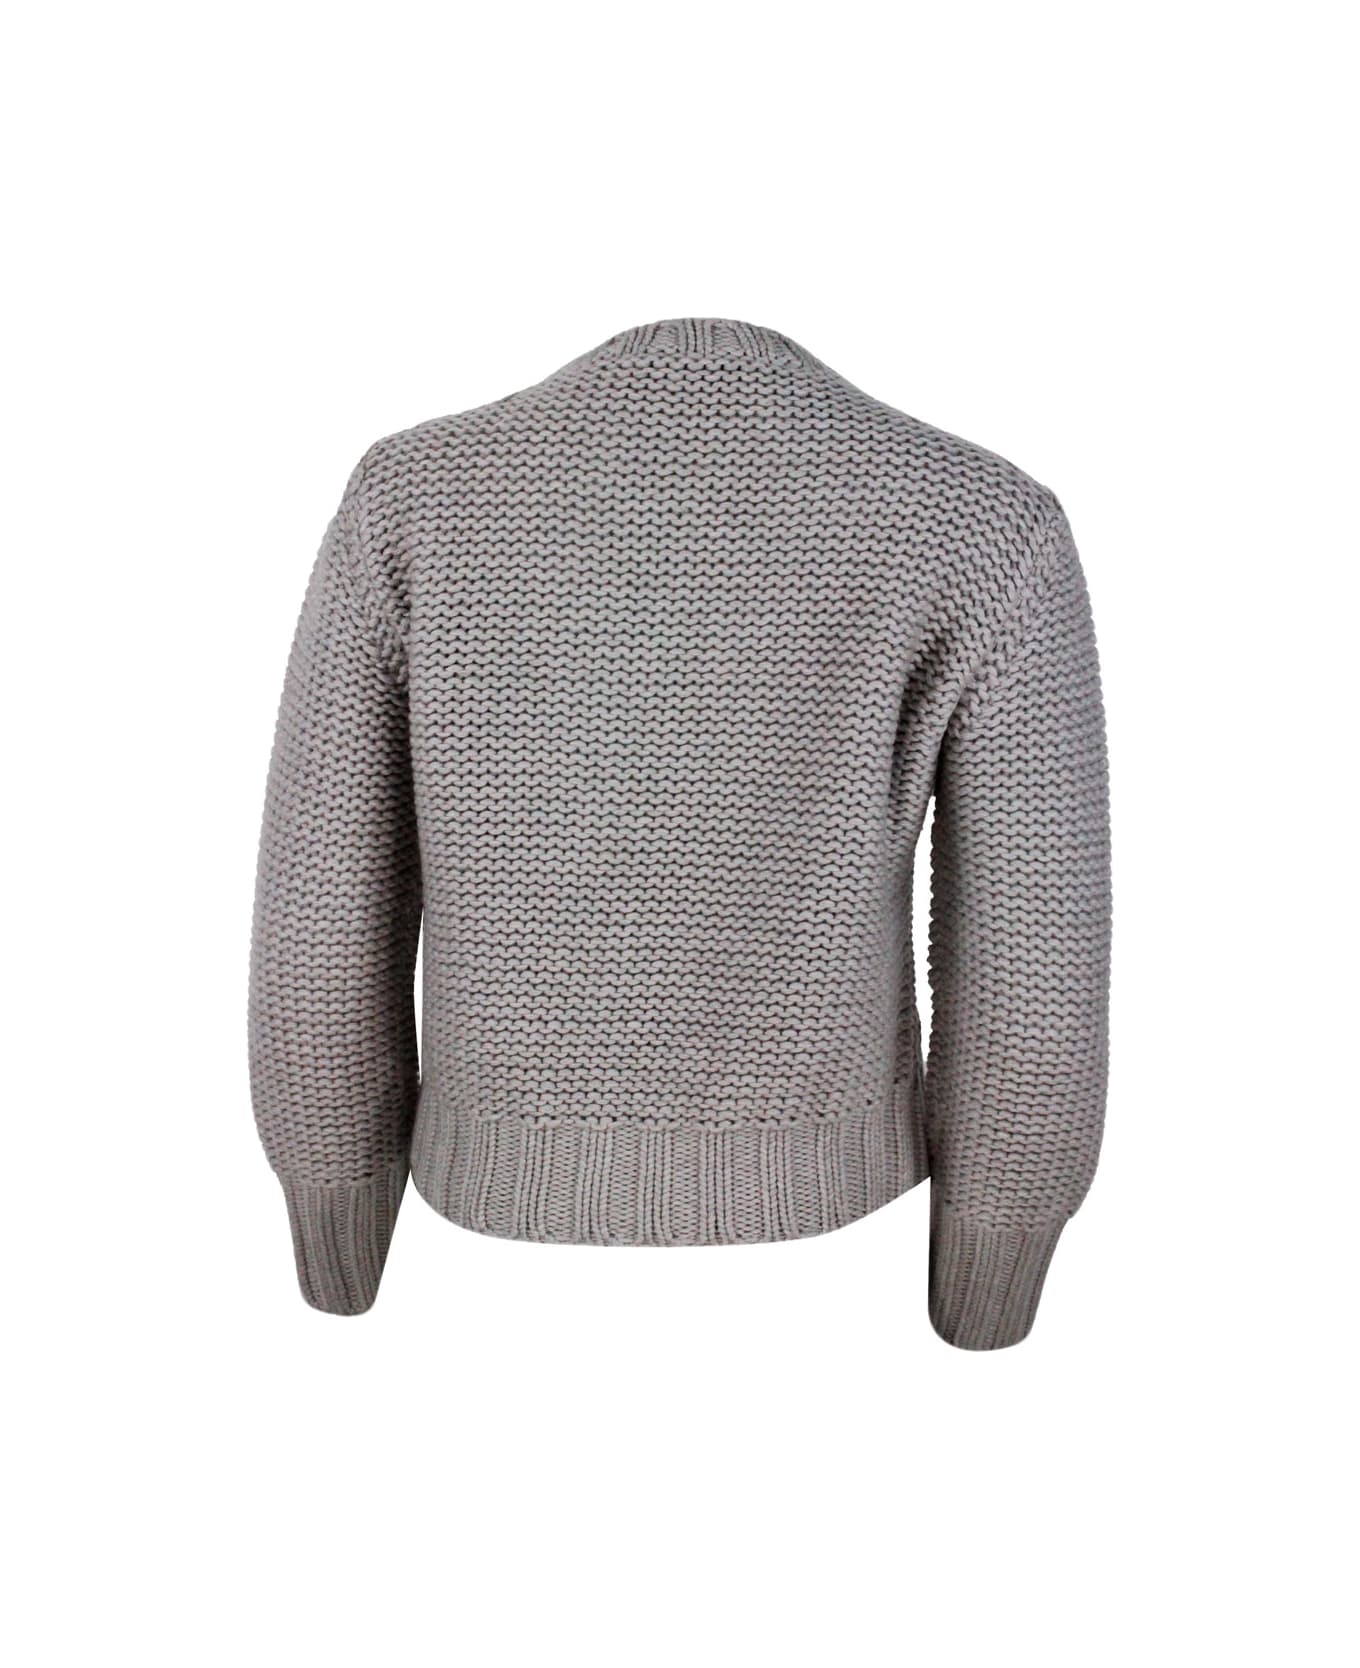 Fabiana Filippi Long Sleeve Crewneck Sweater In 100% Soft Virgin Wool With Cable Knit On The Front - Grey